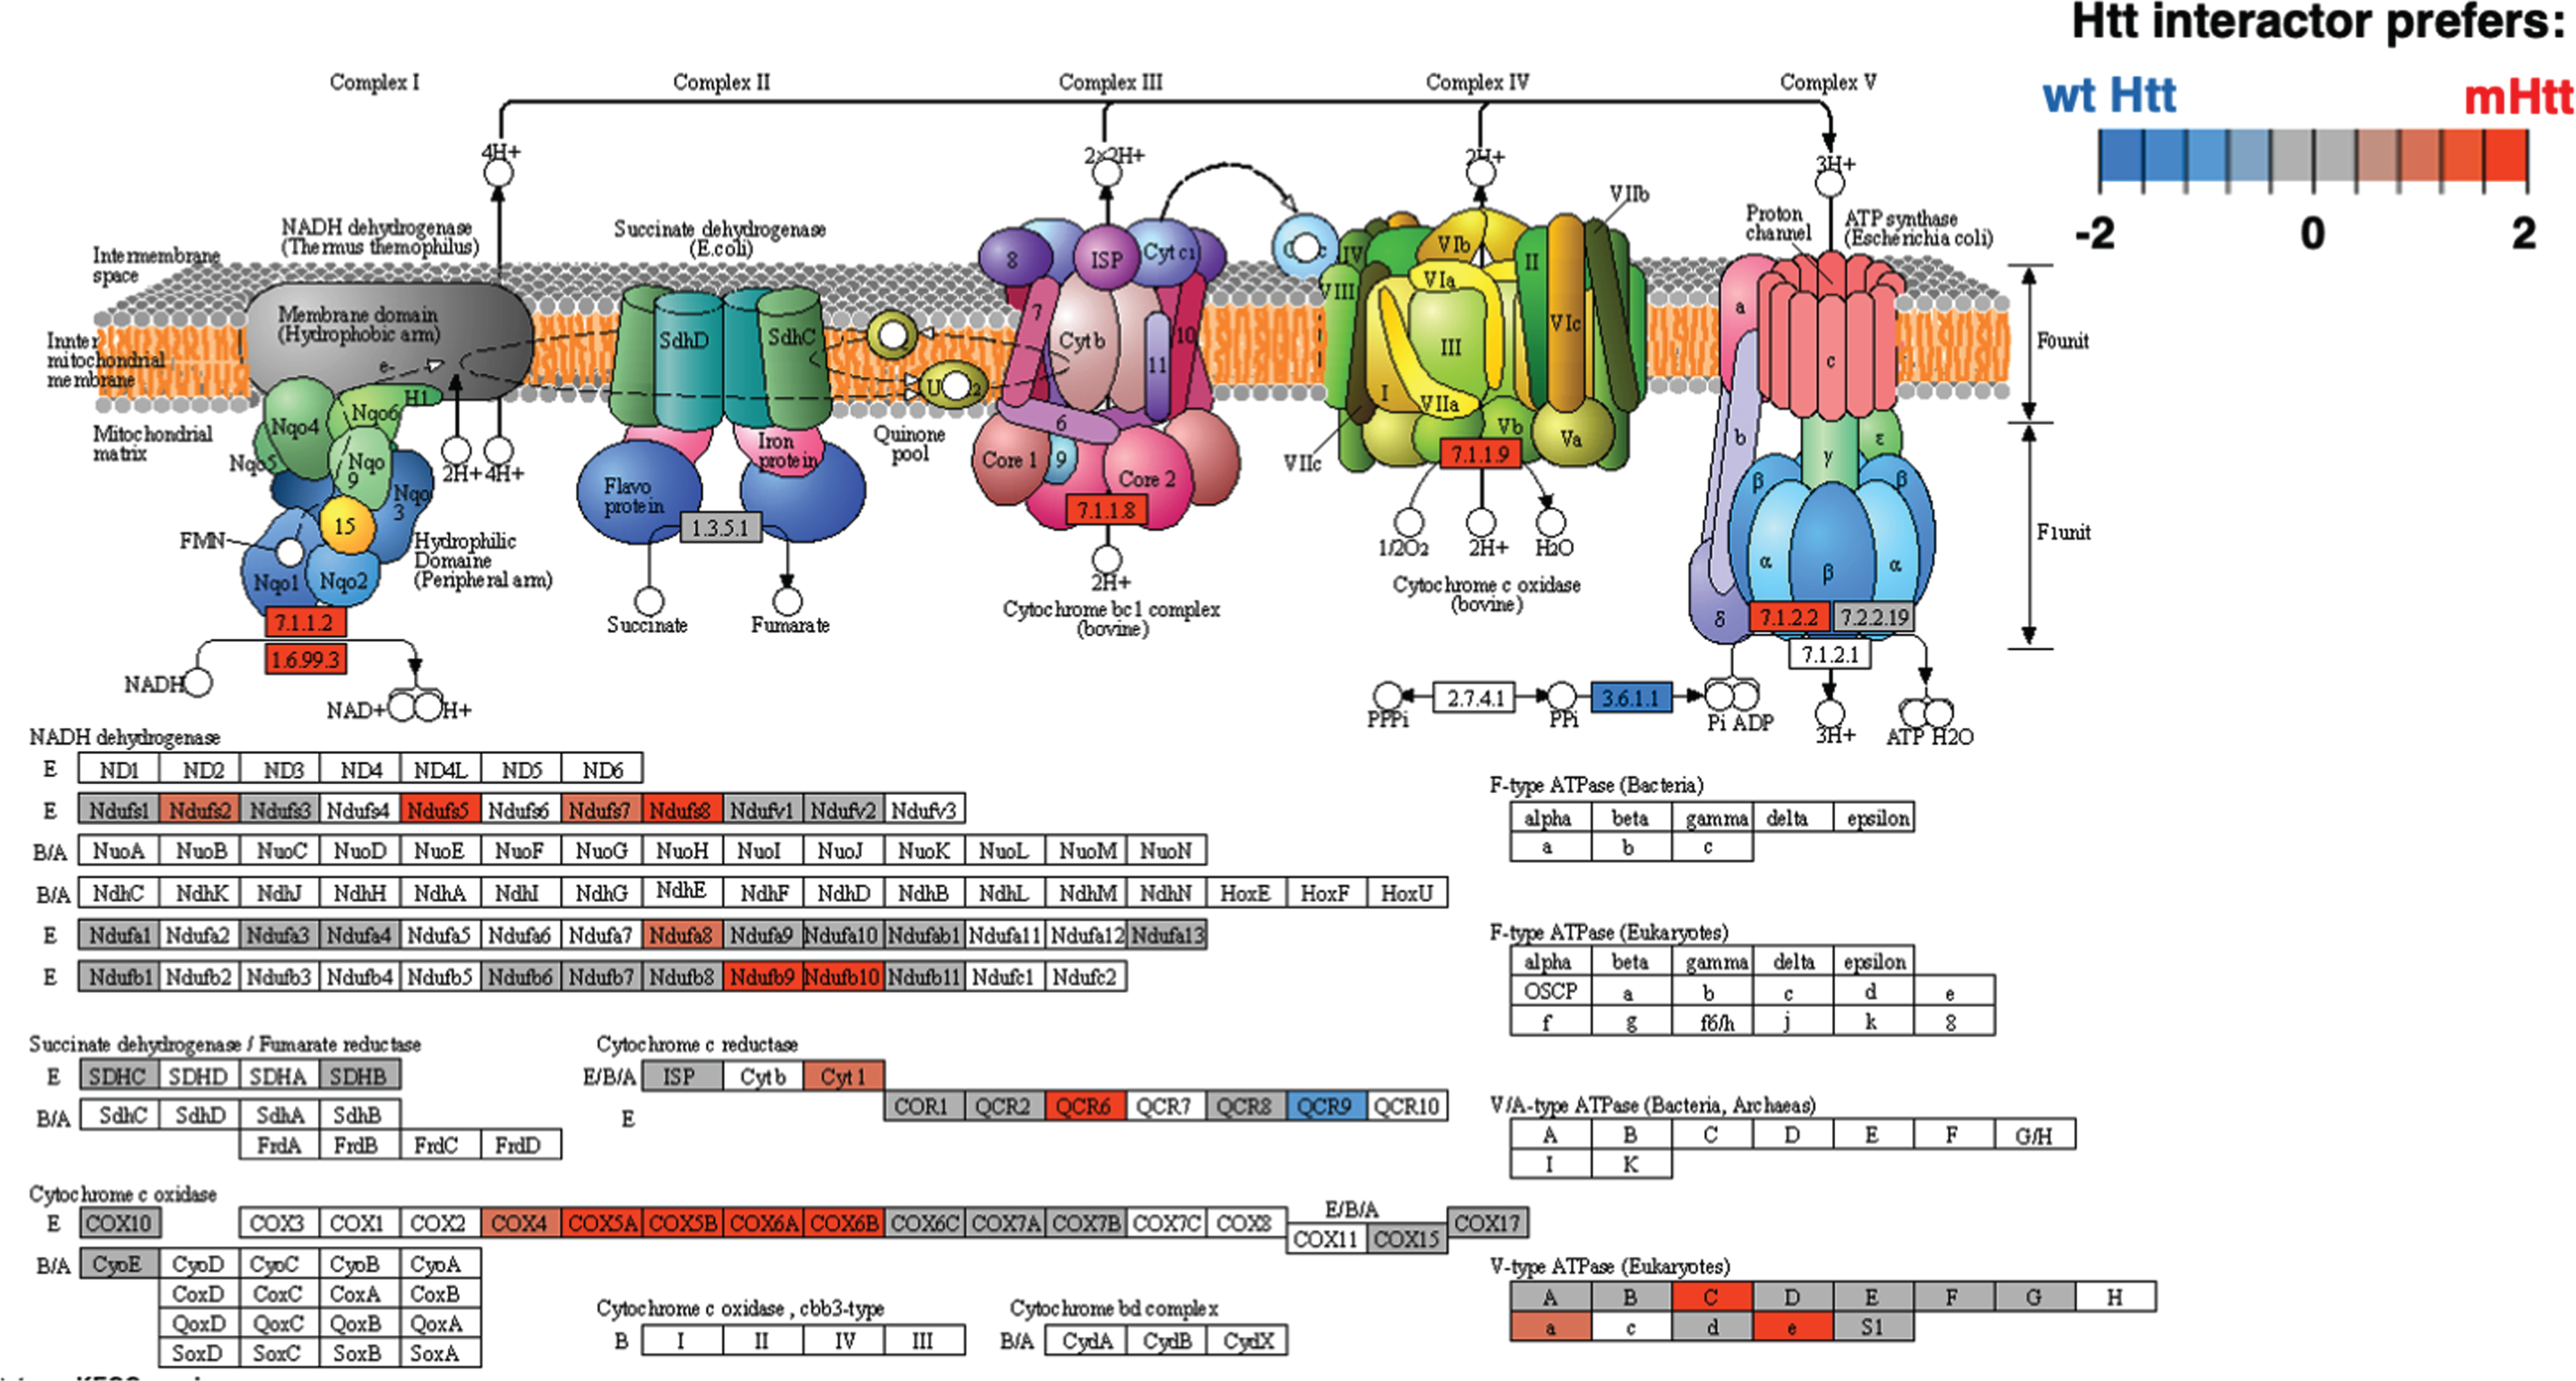 Oxidative phosphorylation KEGG pathway of the mitochondrial cluster. The oxidative phosphorylation pathway of mitochondria was of high significance for interactions with Htt (Supplementary Table 2). Preferred interactions of mutant Htt (mHtt) or wt Htt with pathway components are illustrated by red to blue color key.